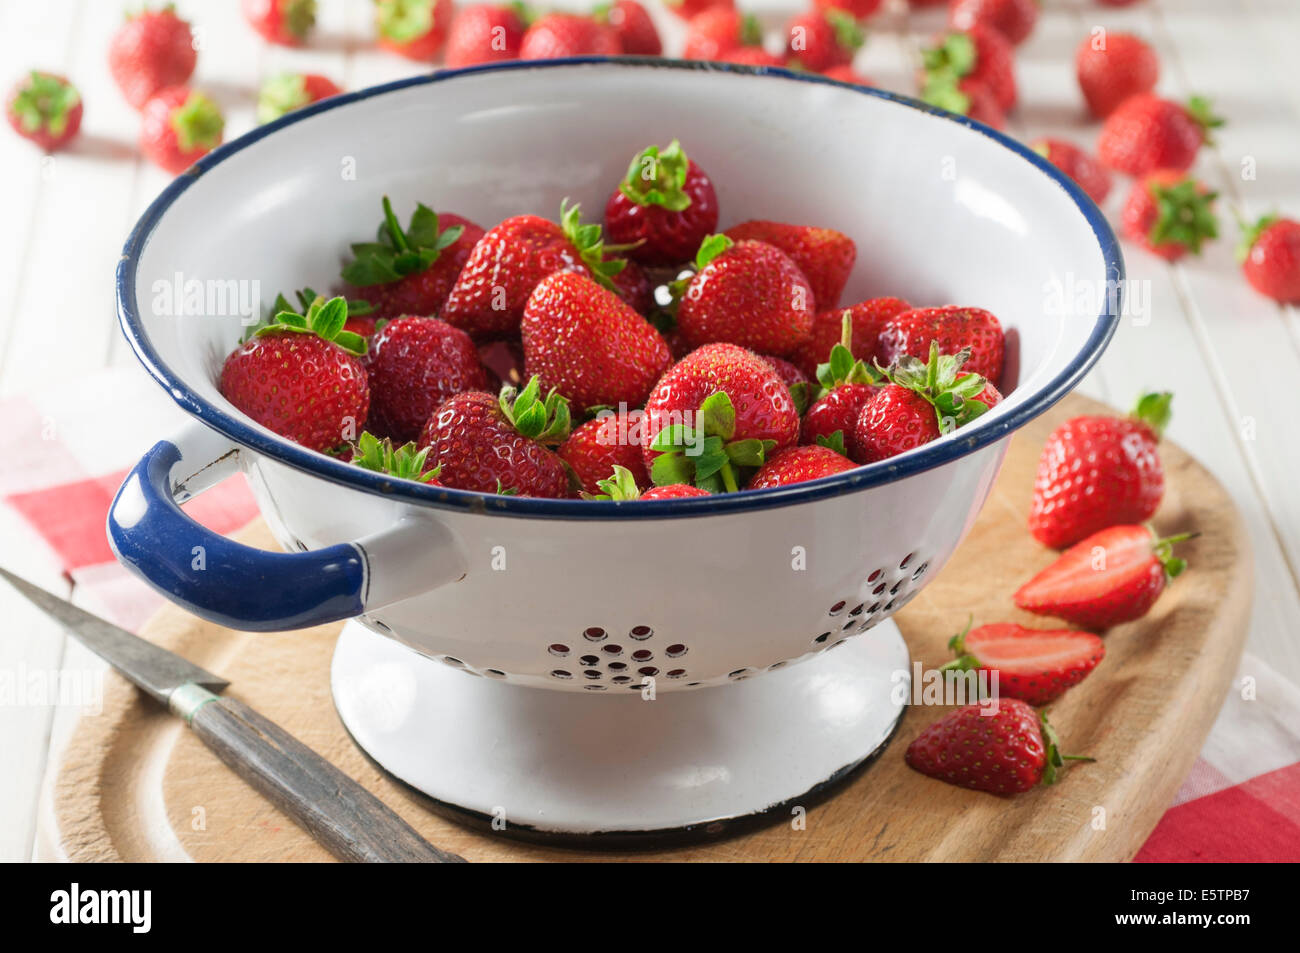 Strawberries in a colander Stock Photo